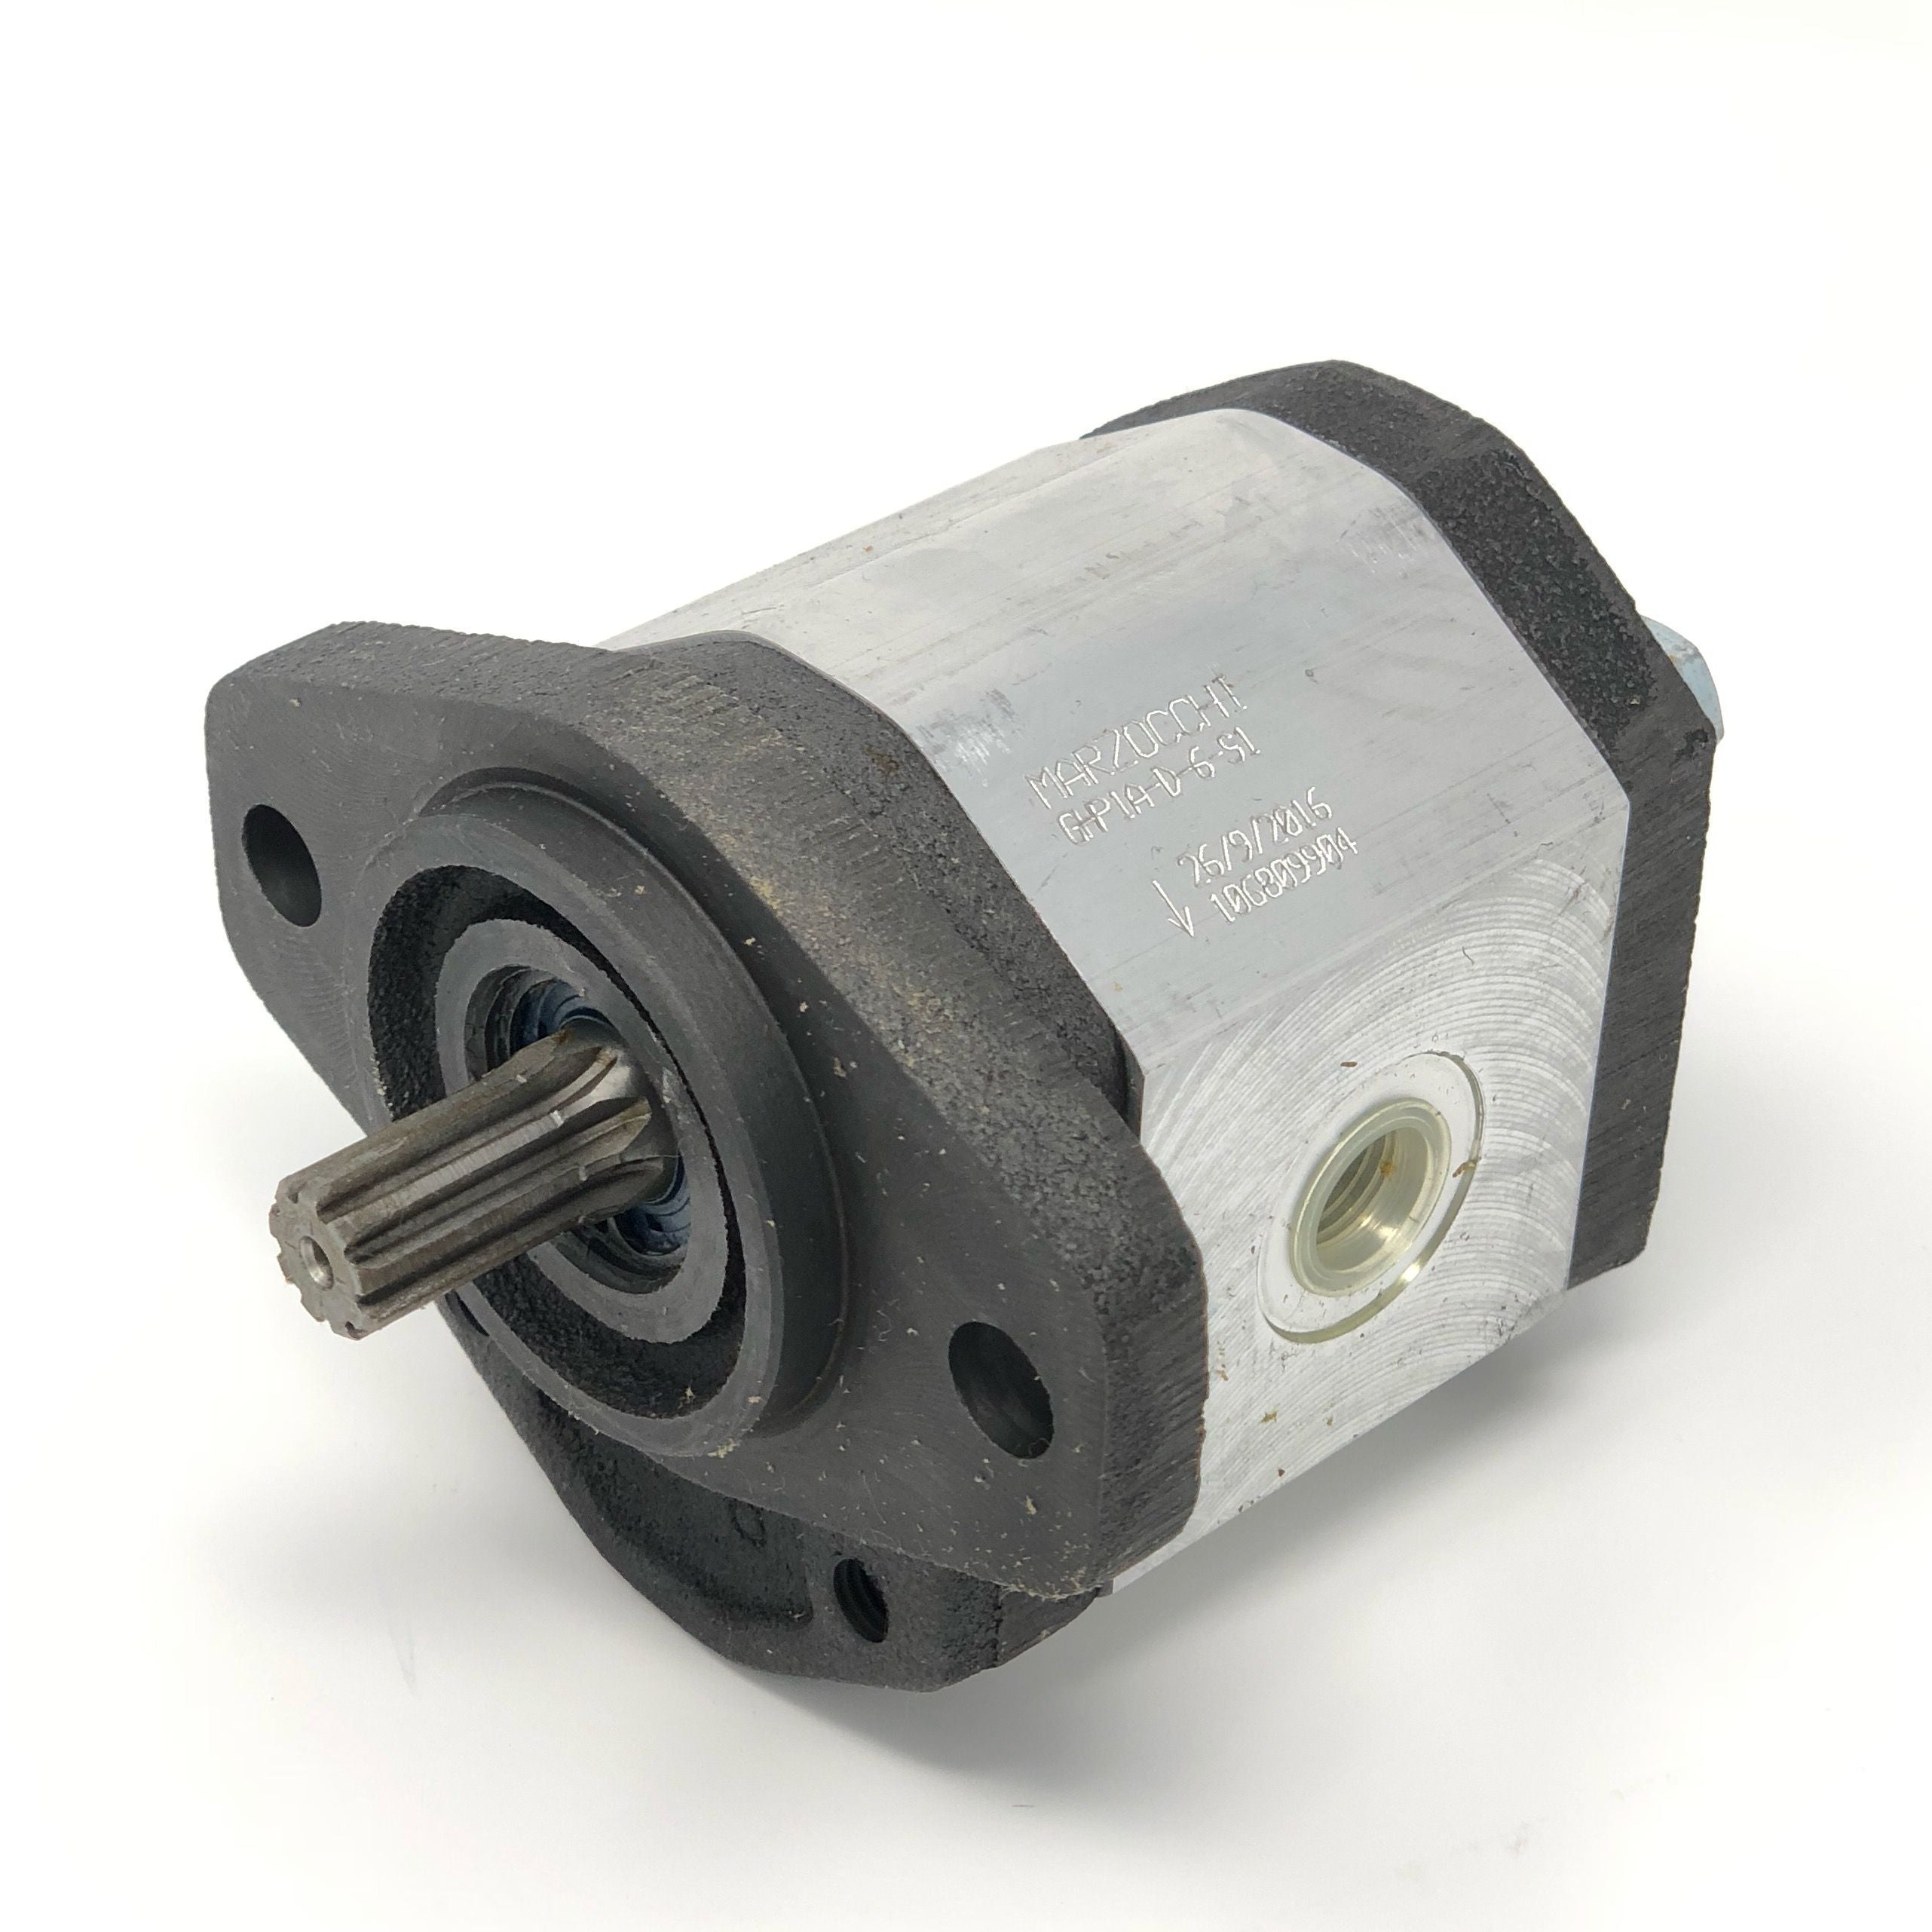 GHP1A-D-2-S1 : Marzocchi Gear Pump, CW, 1.4cc (0.0854in3), 0.67 GPM, 3915psi, 6000 RPM, #8 SAE (1/2") In, #6 SAE (3/8") Out, Splined Shaft 9T 20/40DP, SAE AA 2-Bolt Mount